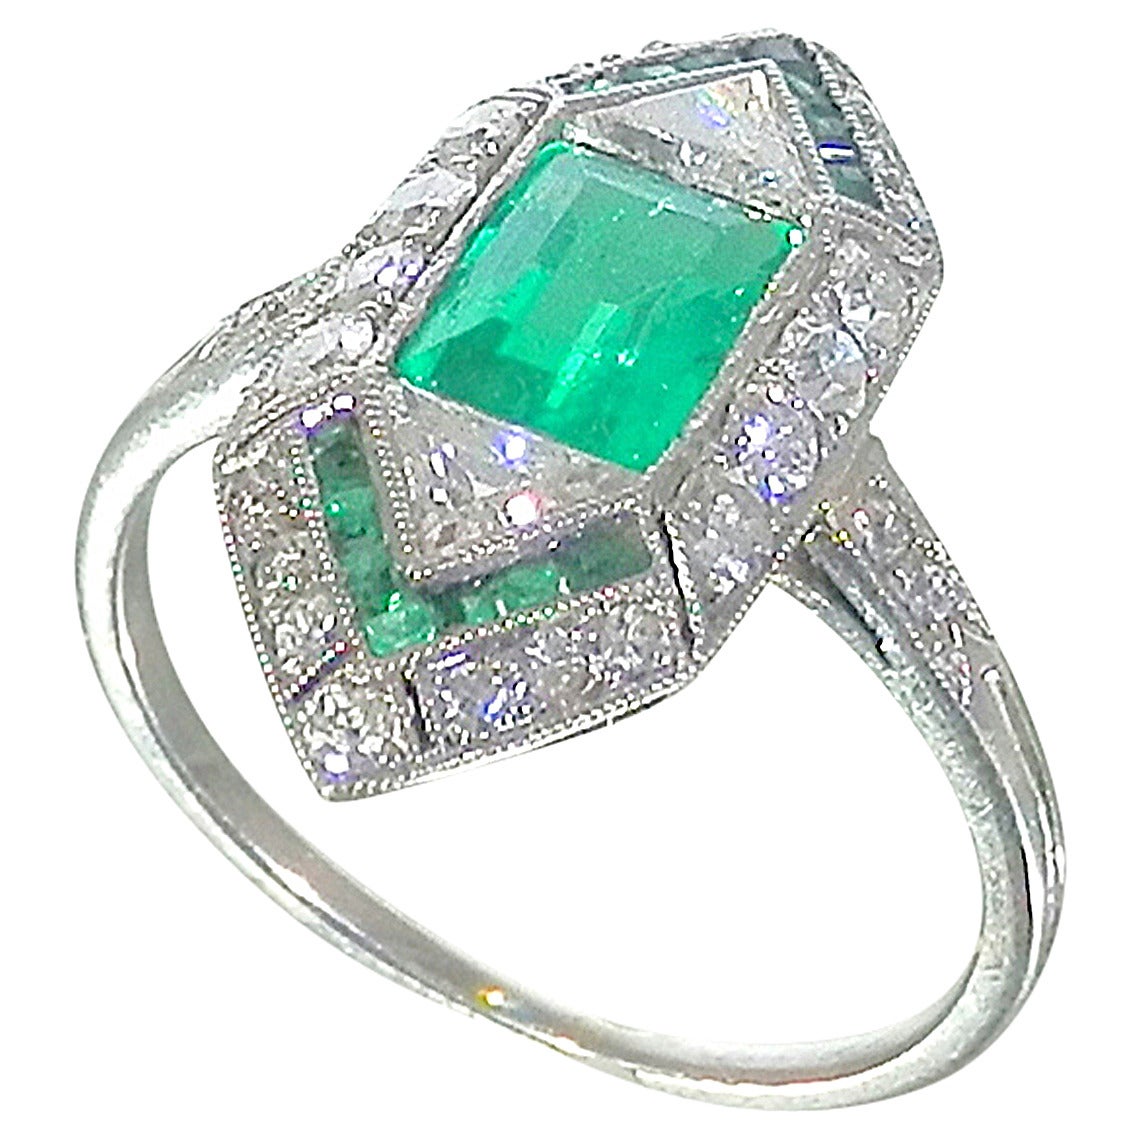 In excess of 1 ct., the emerald in this ring is Colombian displaying a fine medium to light bright green color.  There are 14 caliber cut smaller matching emeralds.  There are 2 old triangle cut diamonds on either side of the center emerald.  There